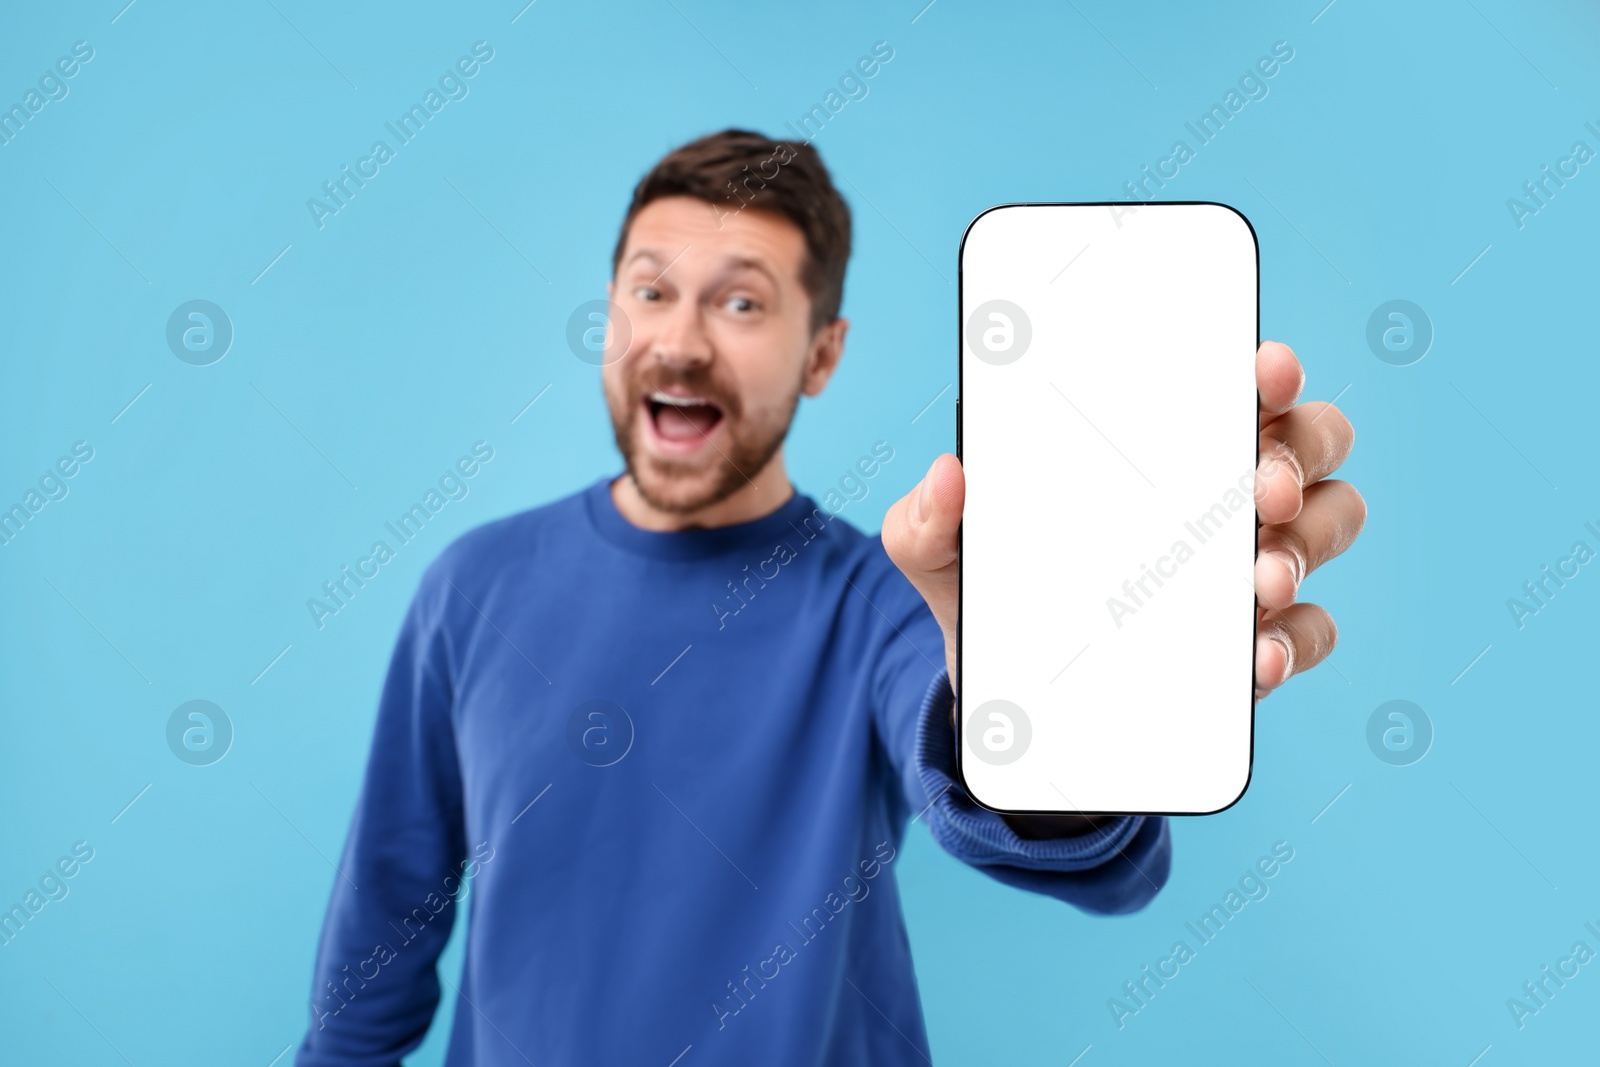 Photo of Surprised man showing smartphone in hand on light blue background, selective focus. Mockup for design